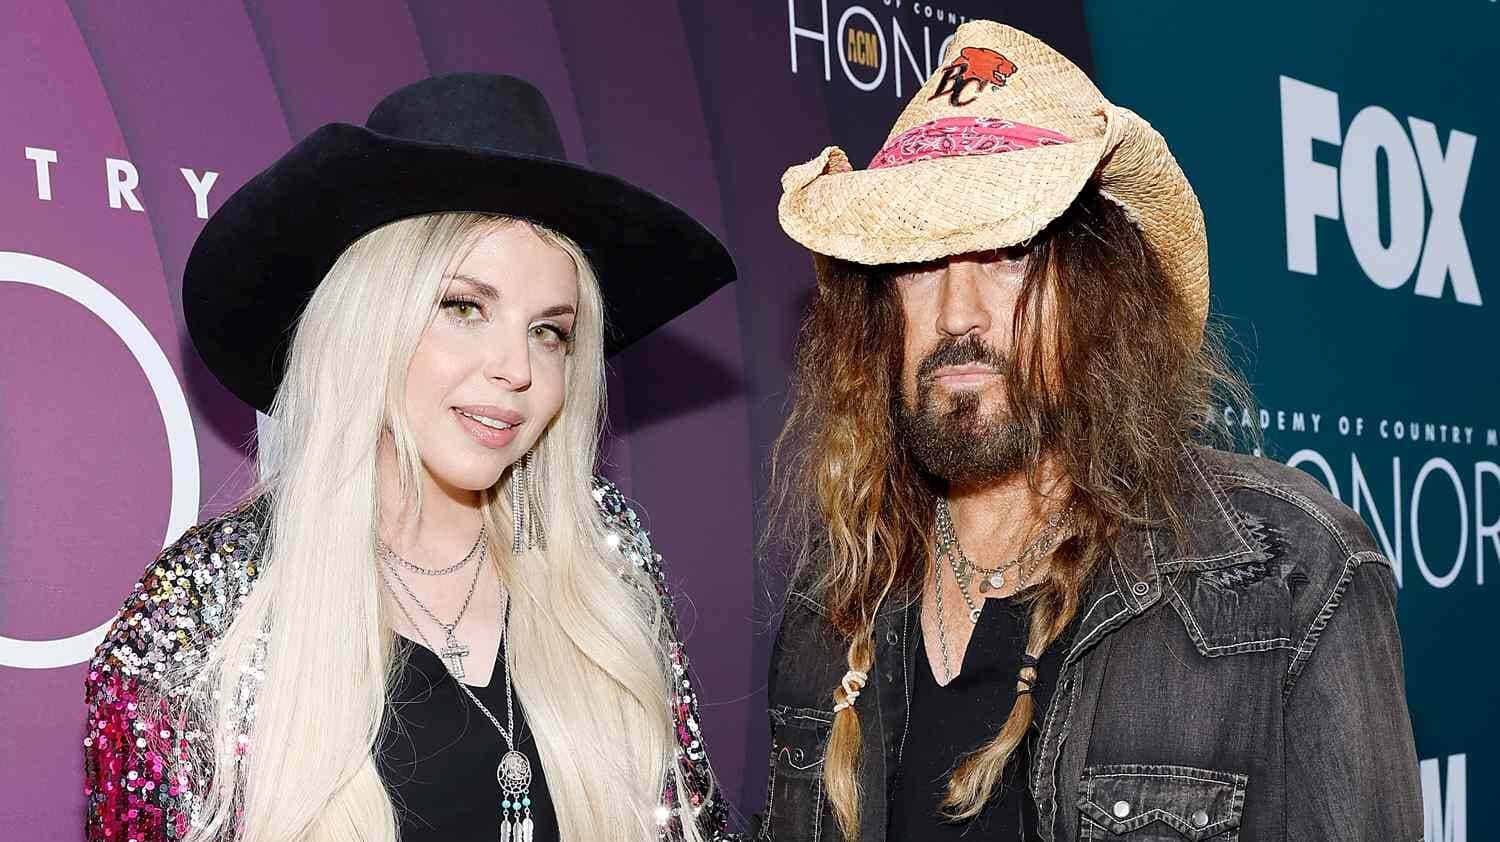 Billy Ray Cyrus eager to move past divorce drama